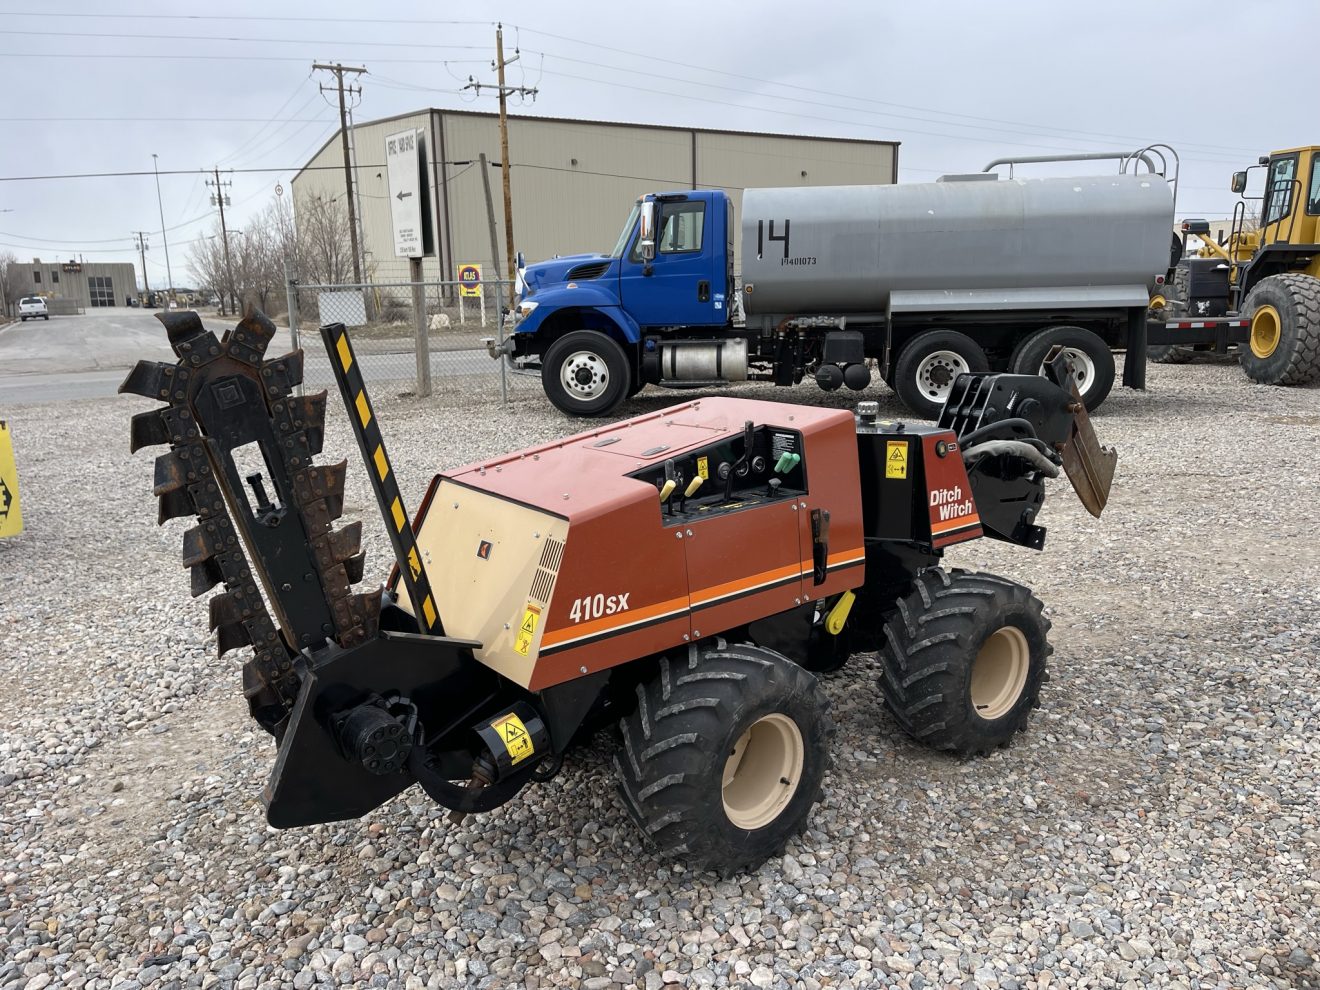 DITCH WITCH MODEL 410SX TRENCHER COMBO